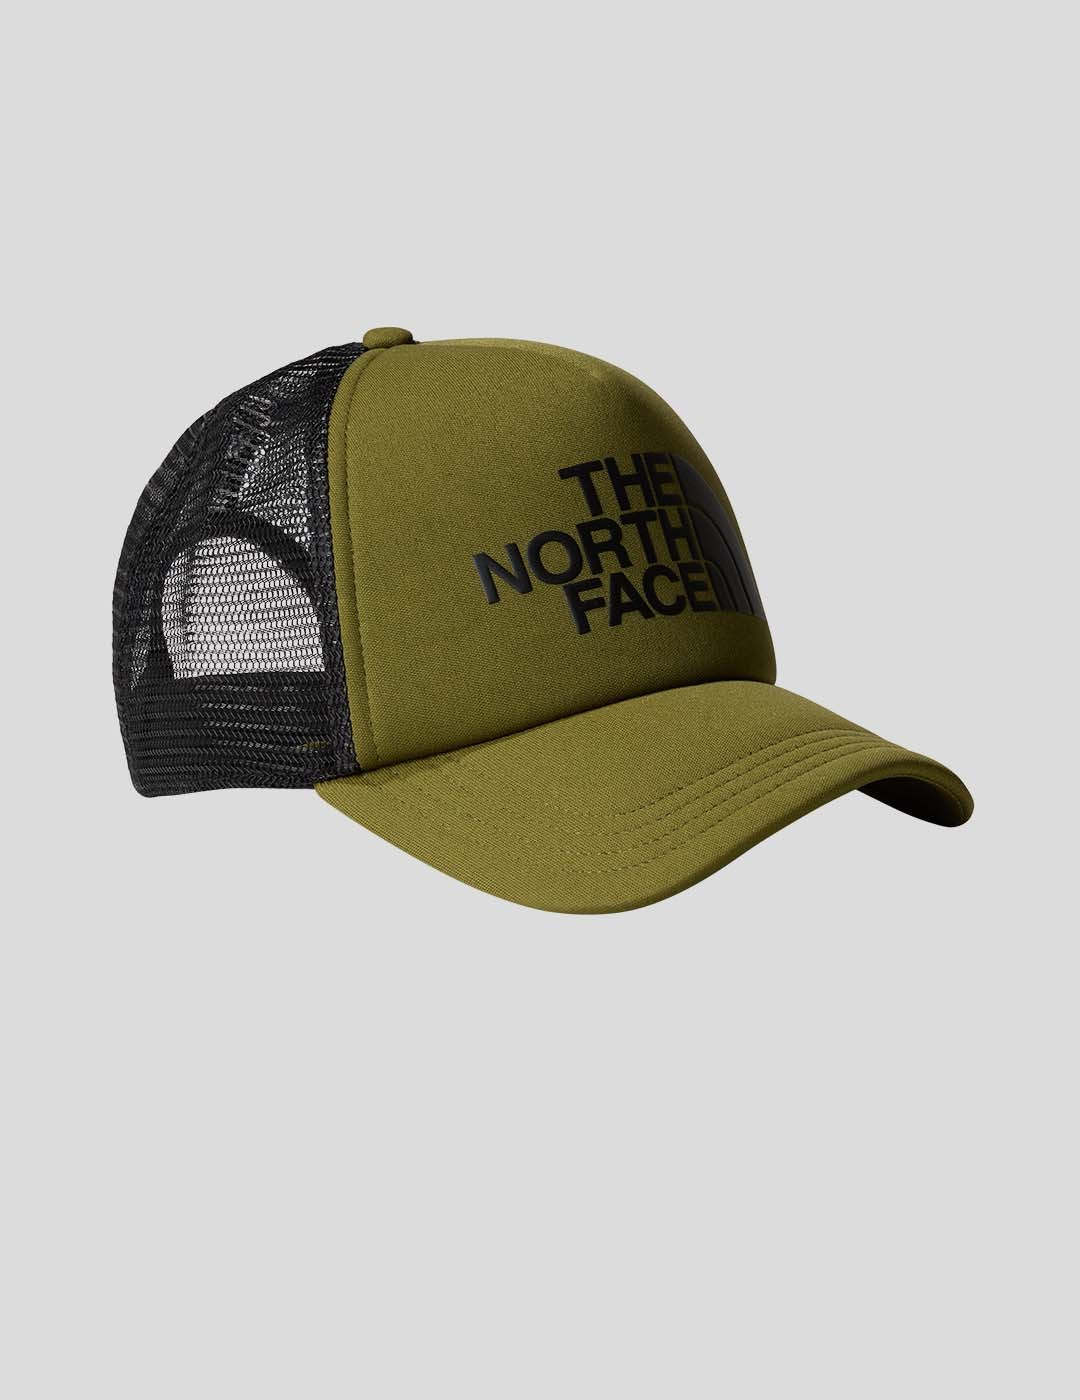 GORRA THE NORTH FACE TNF LOGO TRUCKER  FOREST OLIVE 